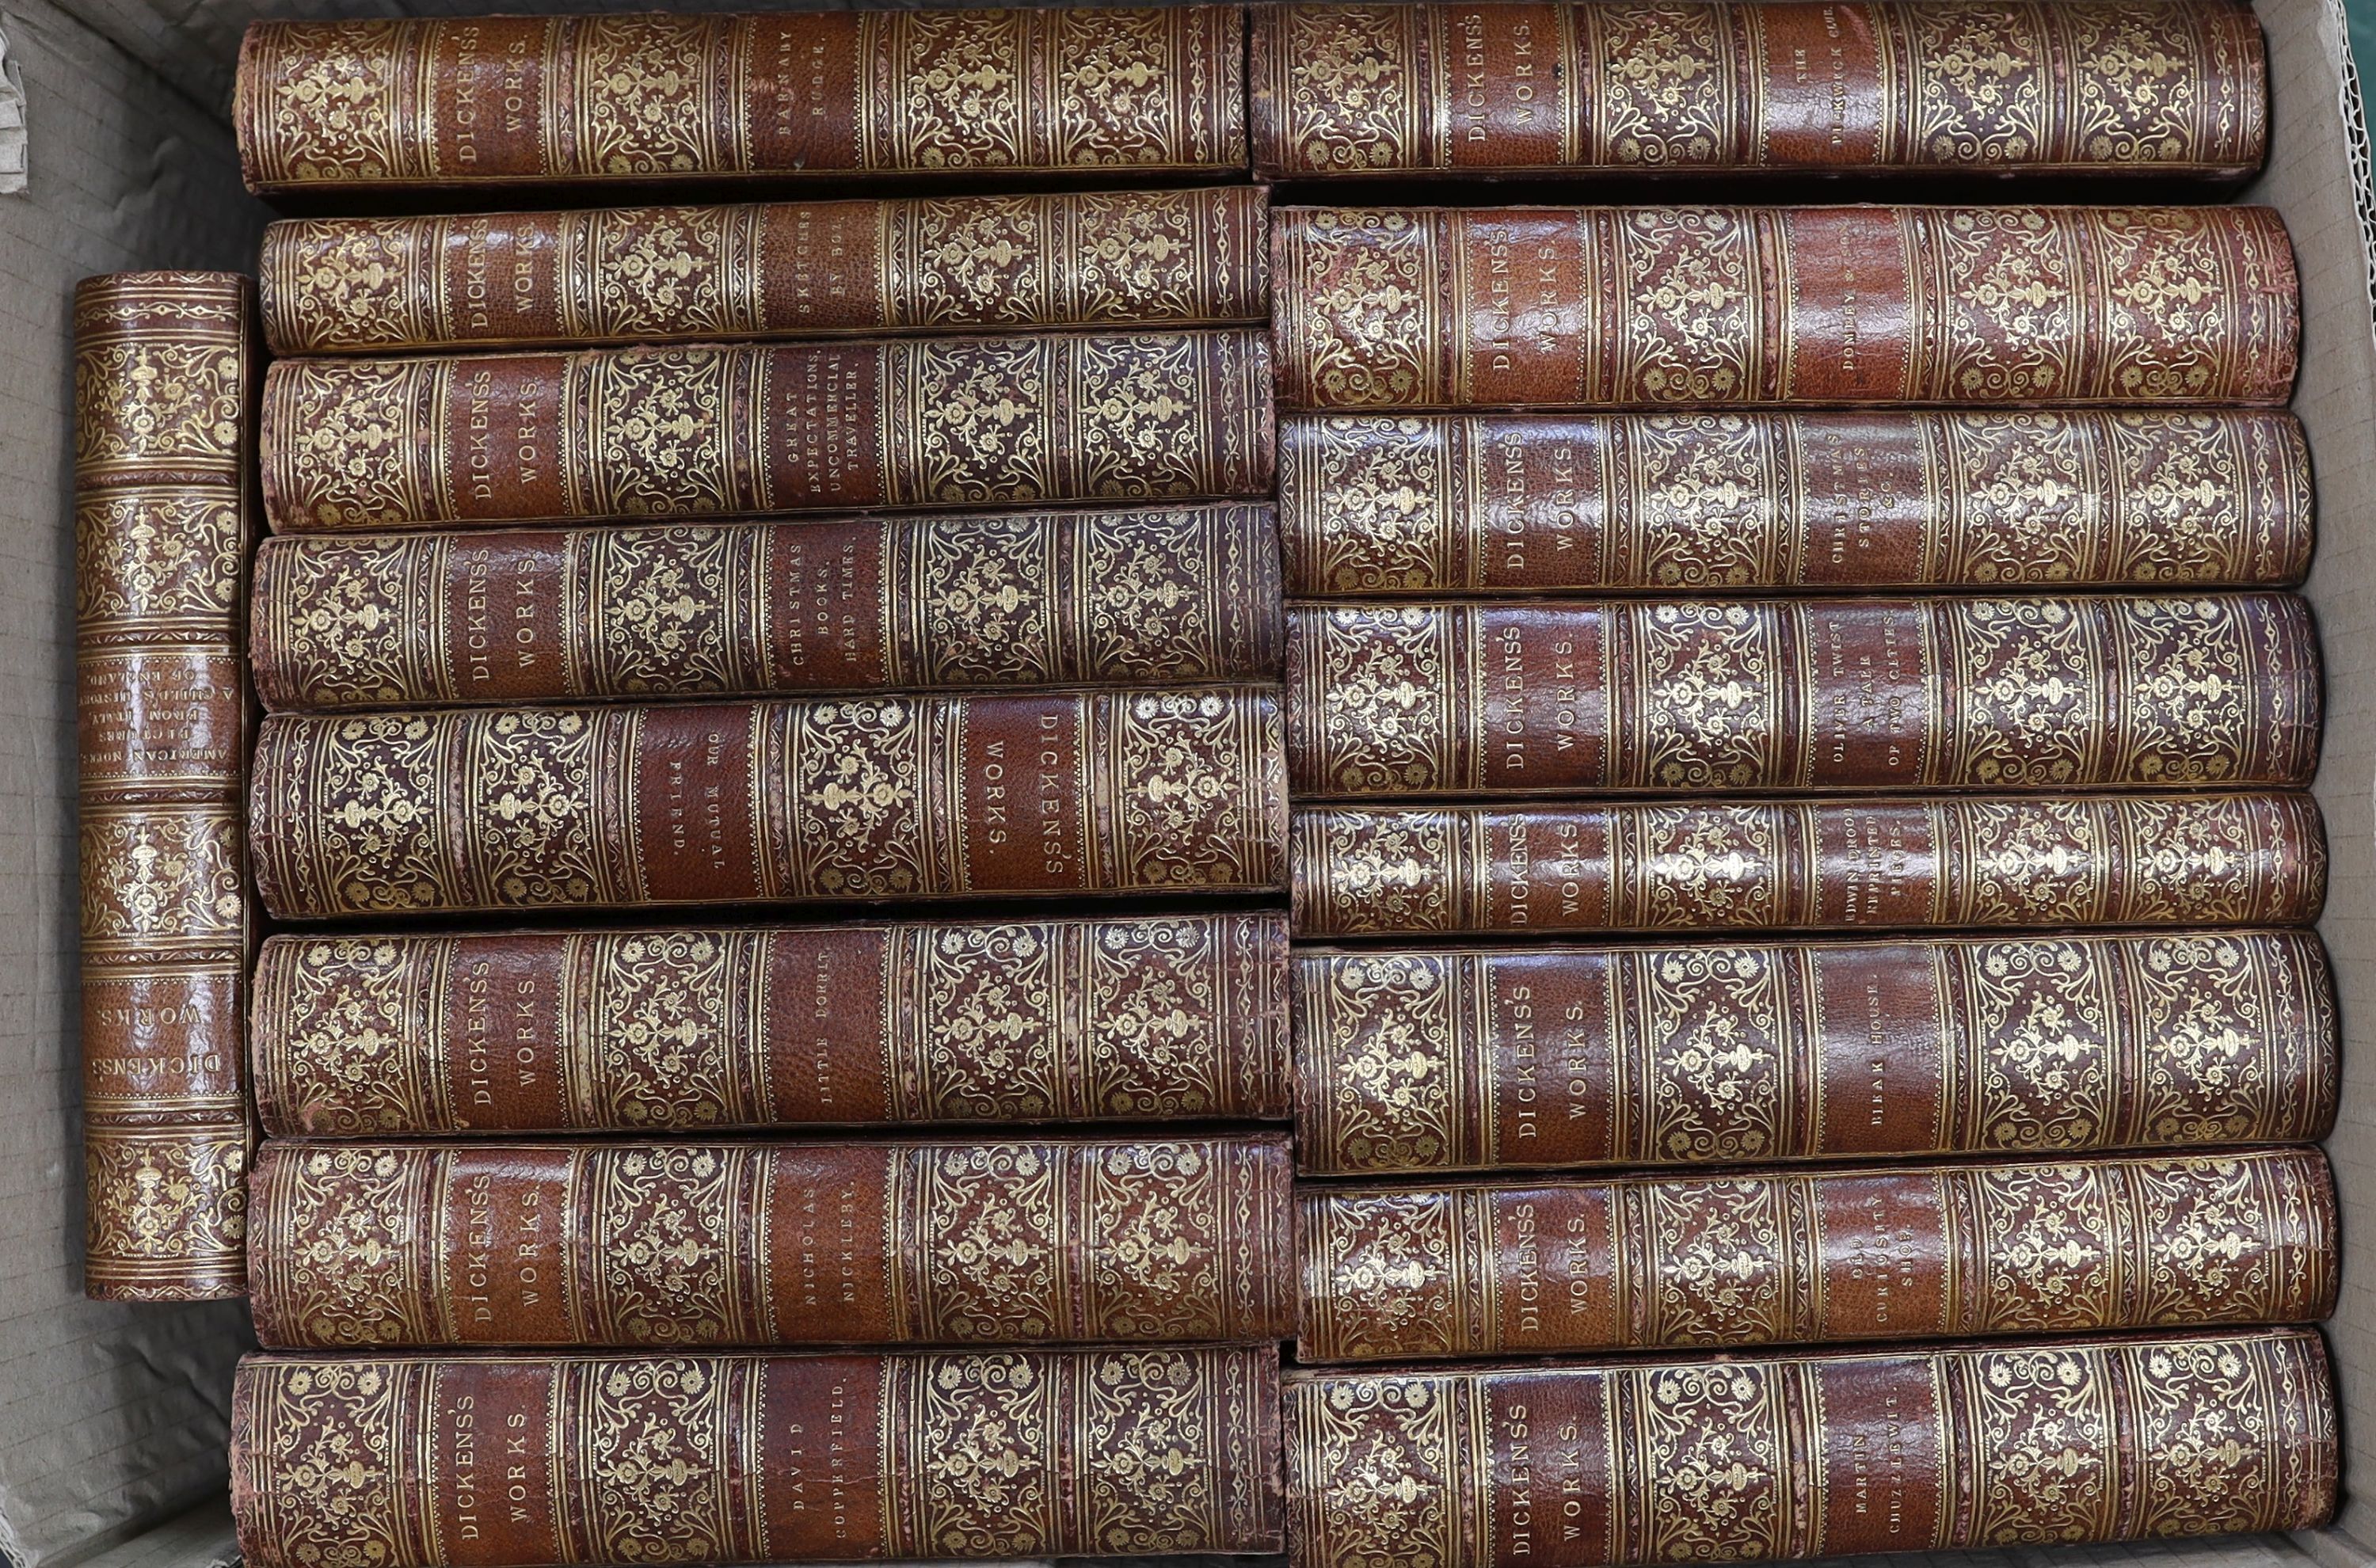 Dickens, Charles - Works, 17 vols, 8vo, half red morocco with marbled boards, the spines gilt in six compartments, each volume profusely illustrated with engravings, Chapman and Hall, London, 1890